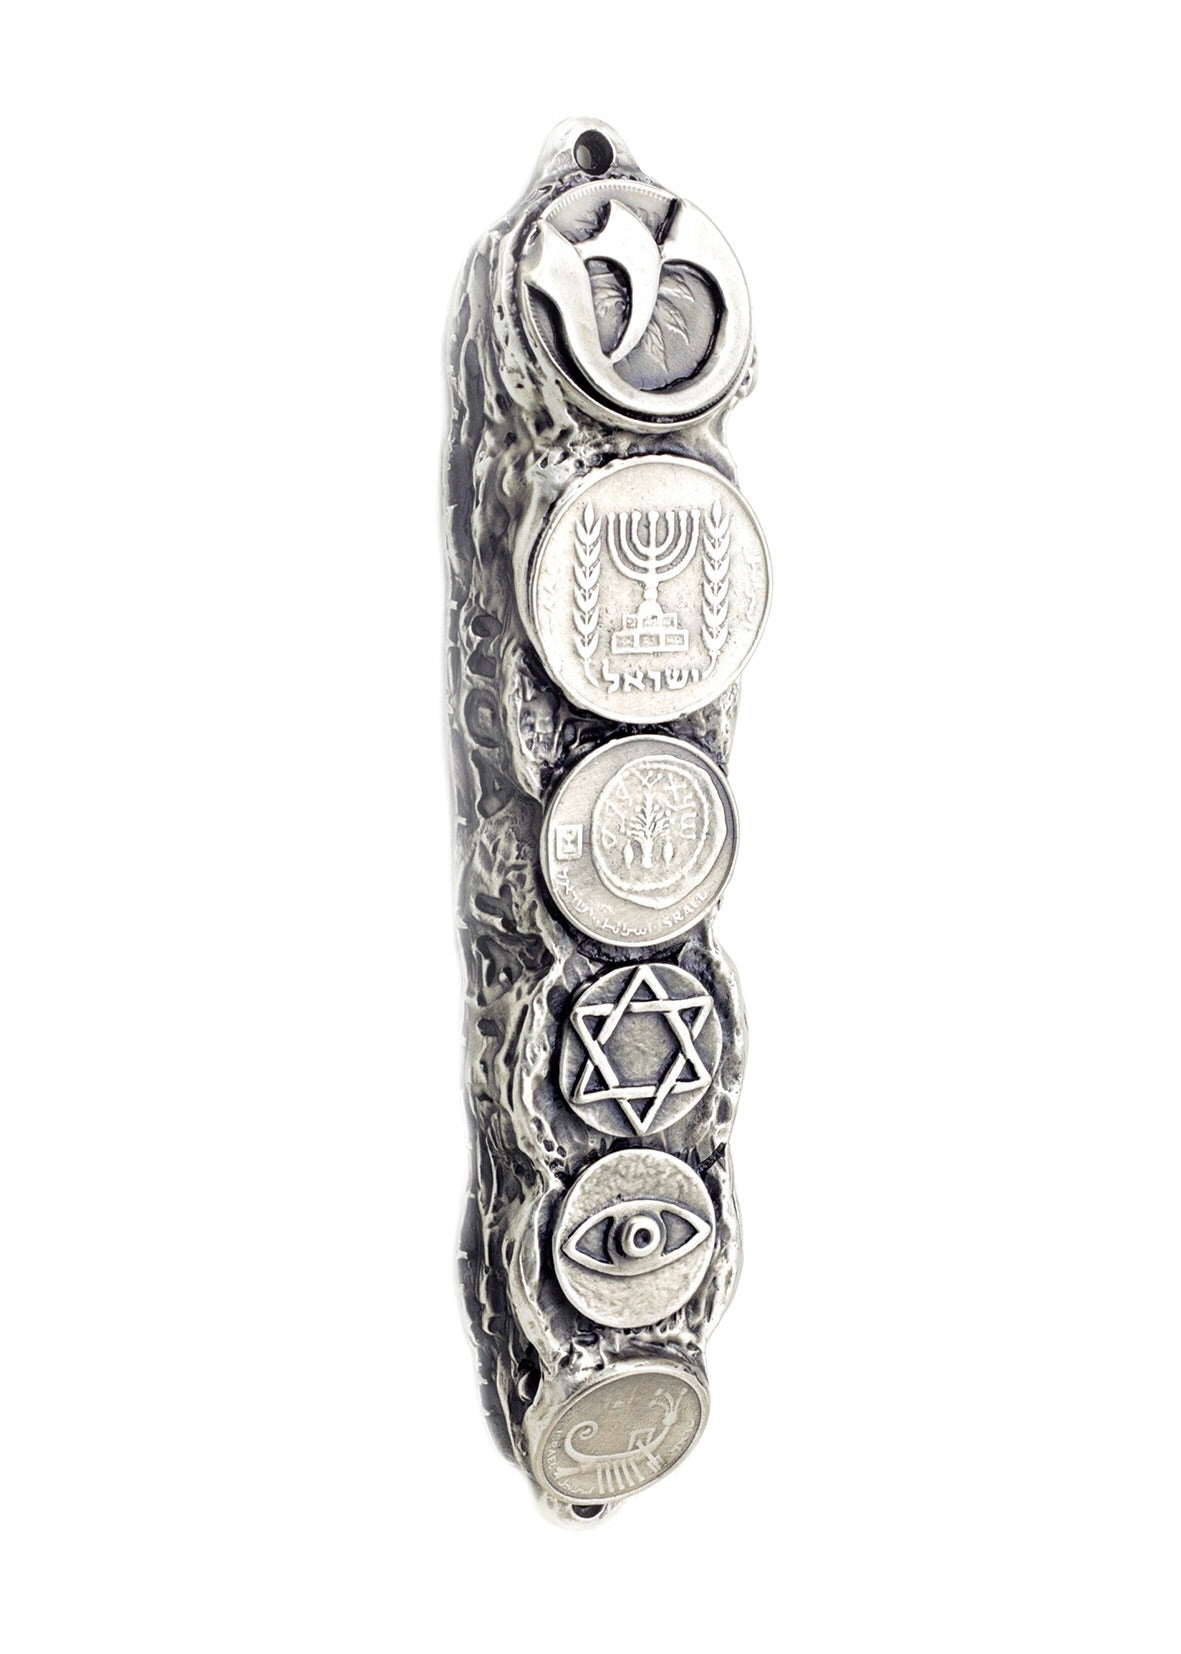 Silver Mezuzah Case, Sterling Silver Mezuzah with Scroll for Door, Ornate Mezuzah, Intricate Royal Mezzuzahs, Judaica Gifts for Home - Small (13cm)